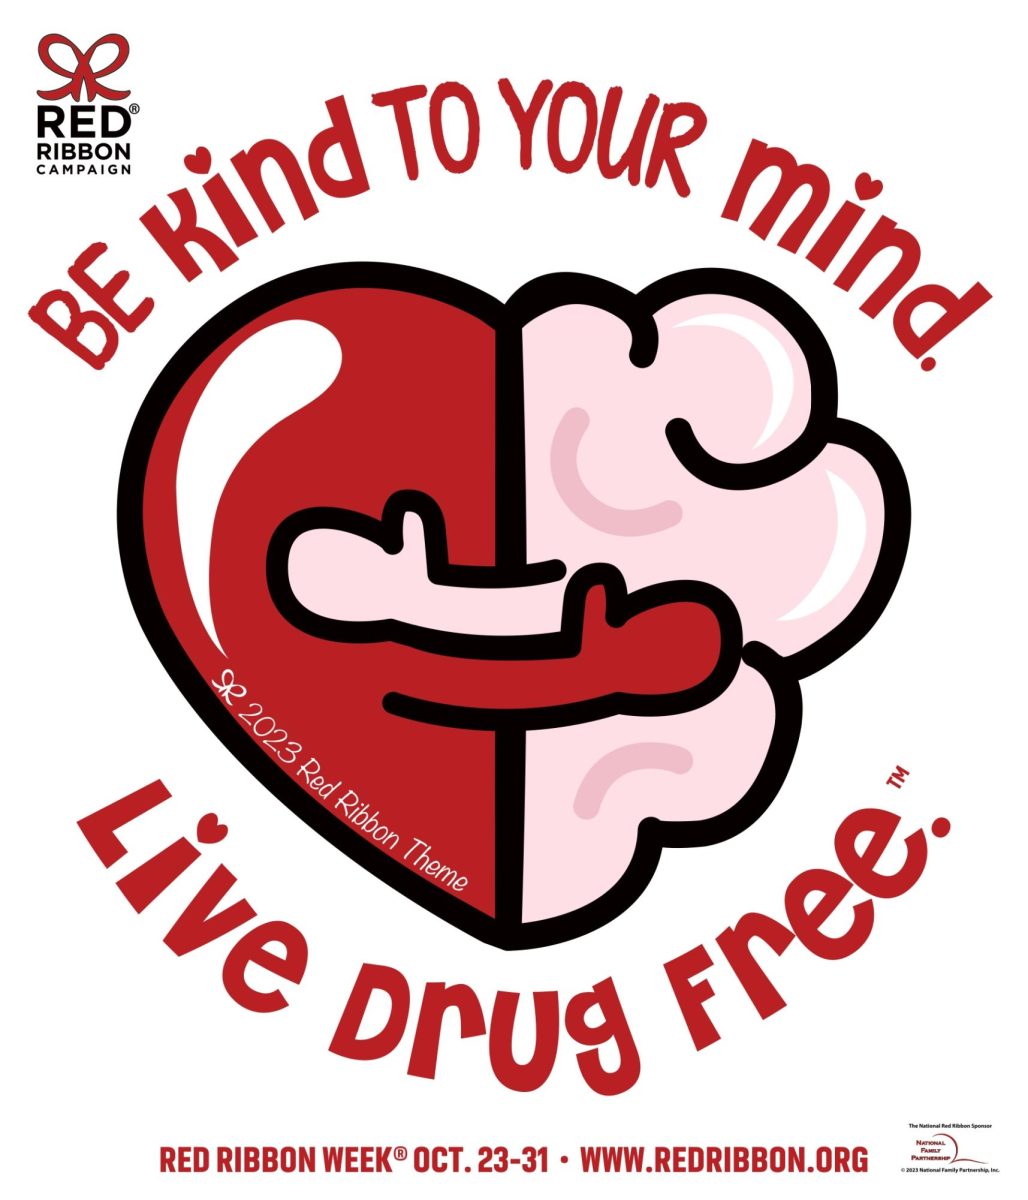 This years theme for Red Ribbon Week is Be Kind to Your Mind.